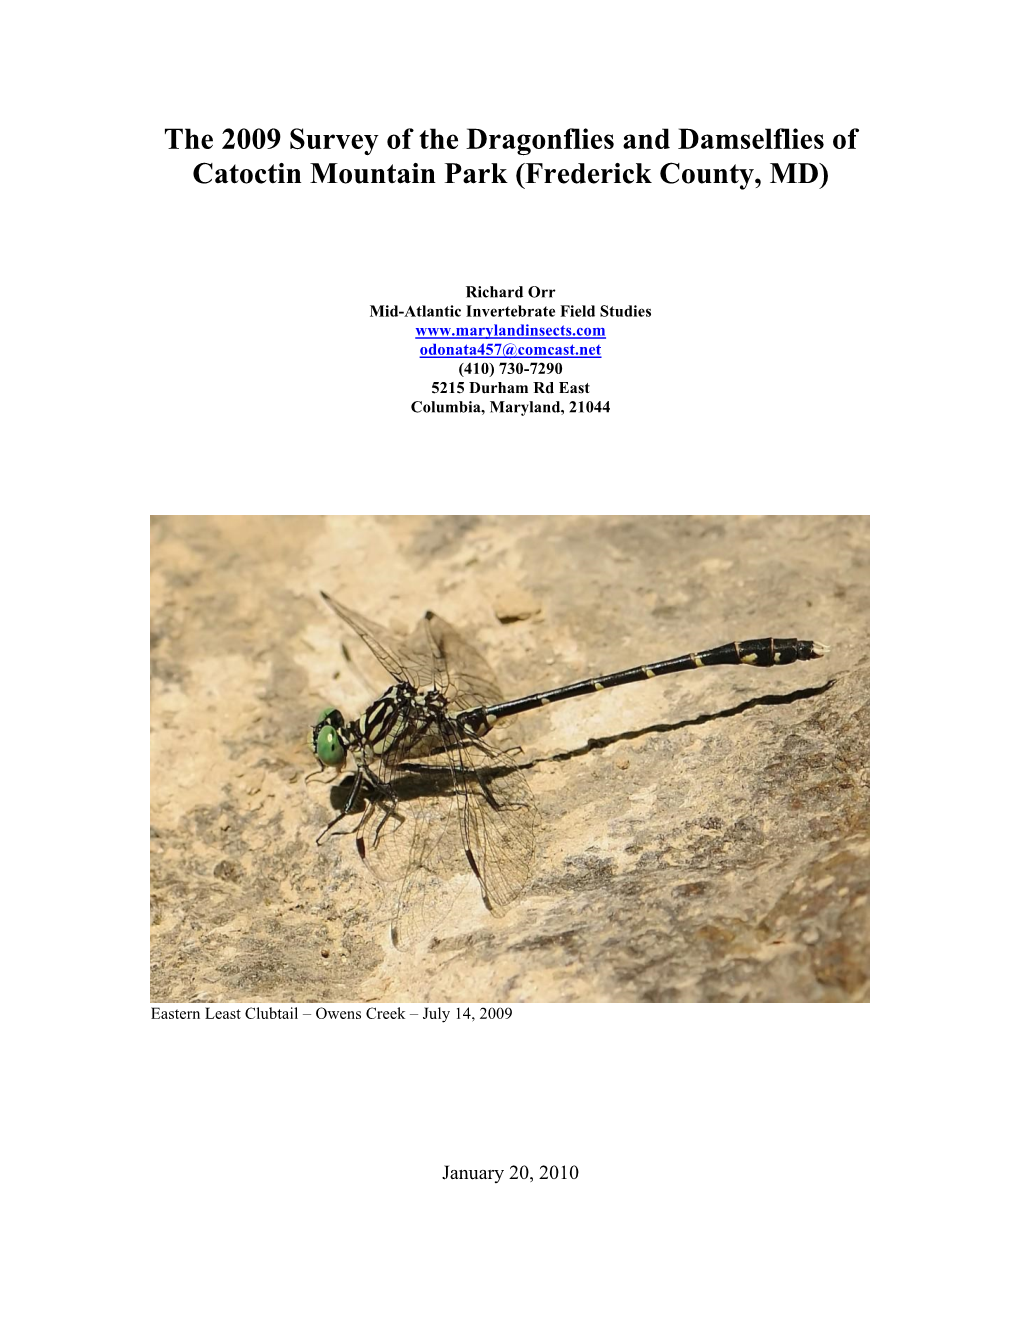 The 2009 Survey of the Dragonflies and Damselflies of Catoctin Mountain Park (Frederick County, MD)